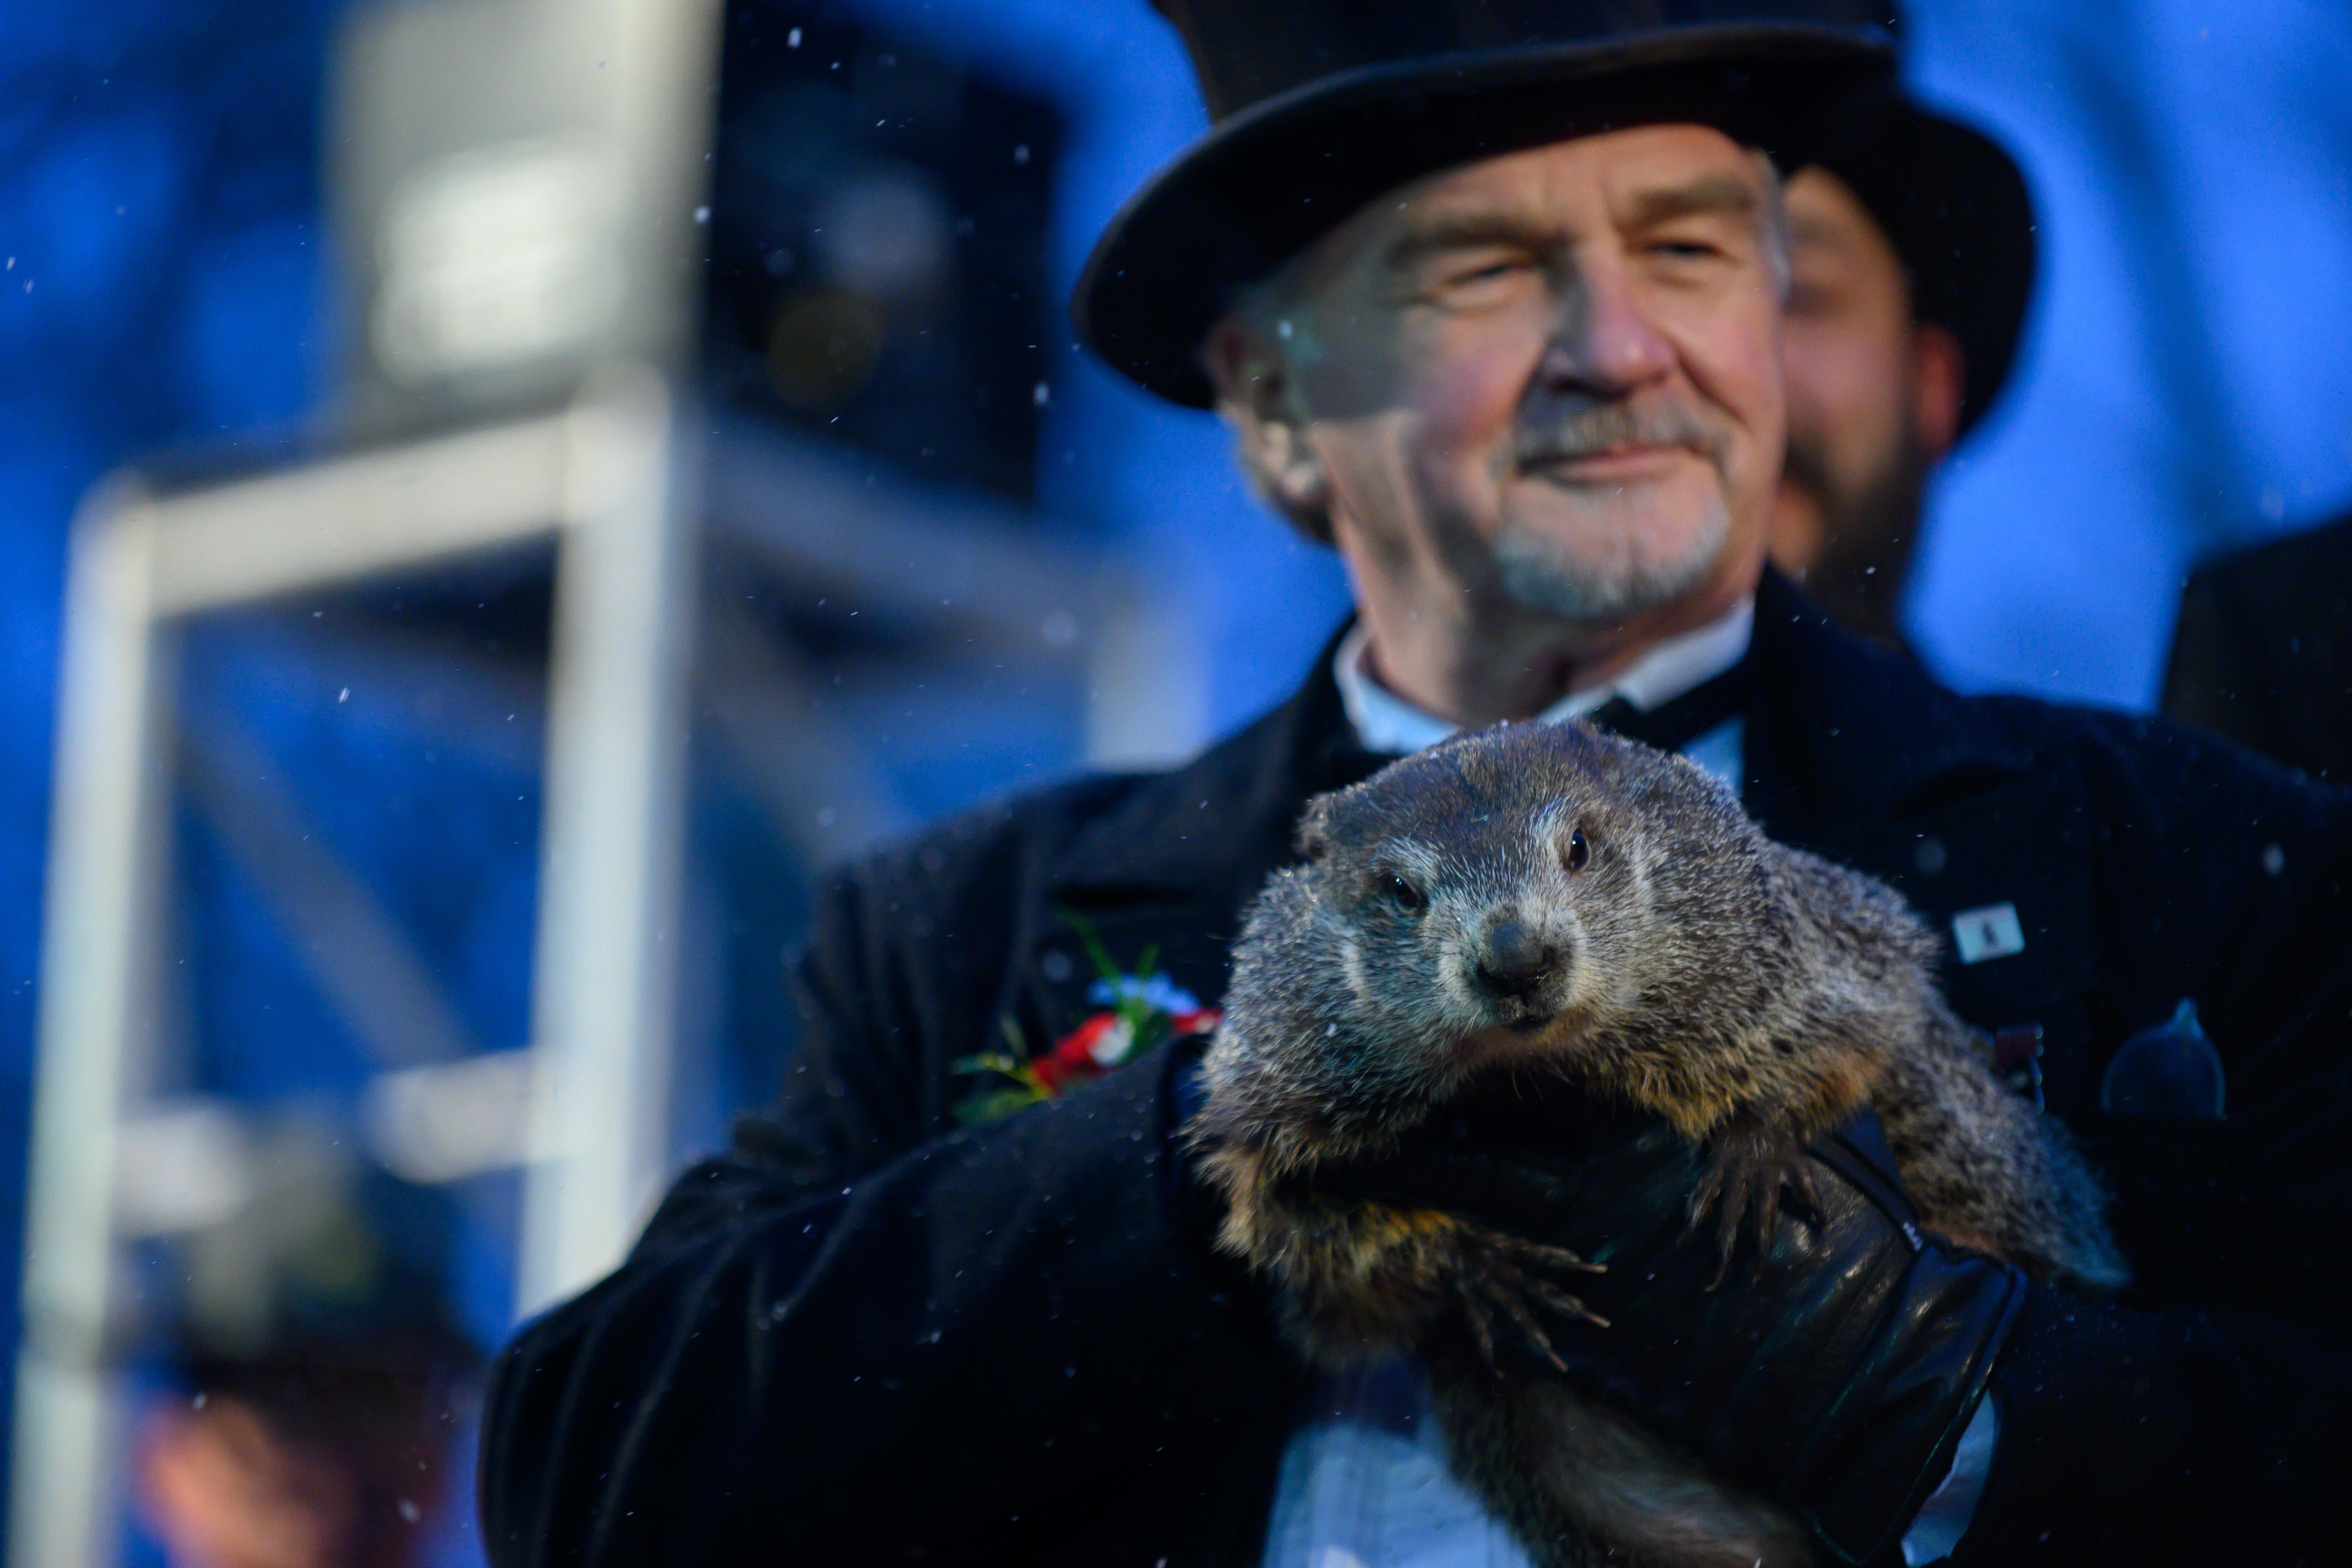 Groundhog handler John Griffiths holds Punxsutawney Phil, who did not see his shadow, predicting an early or late spring during the 134th annual Groundhog Day festivities on February 2, 2020 in Punxsutawney, Pennsylvania. 